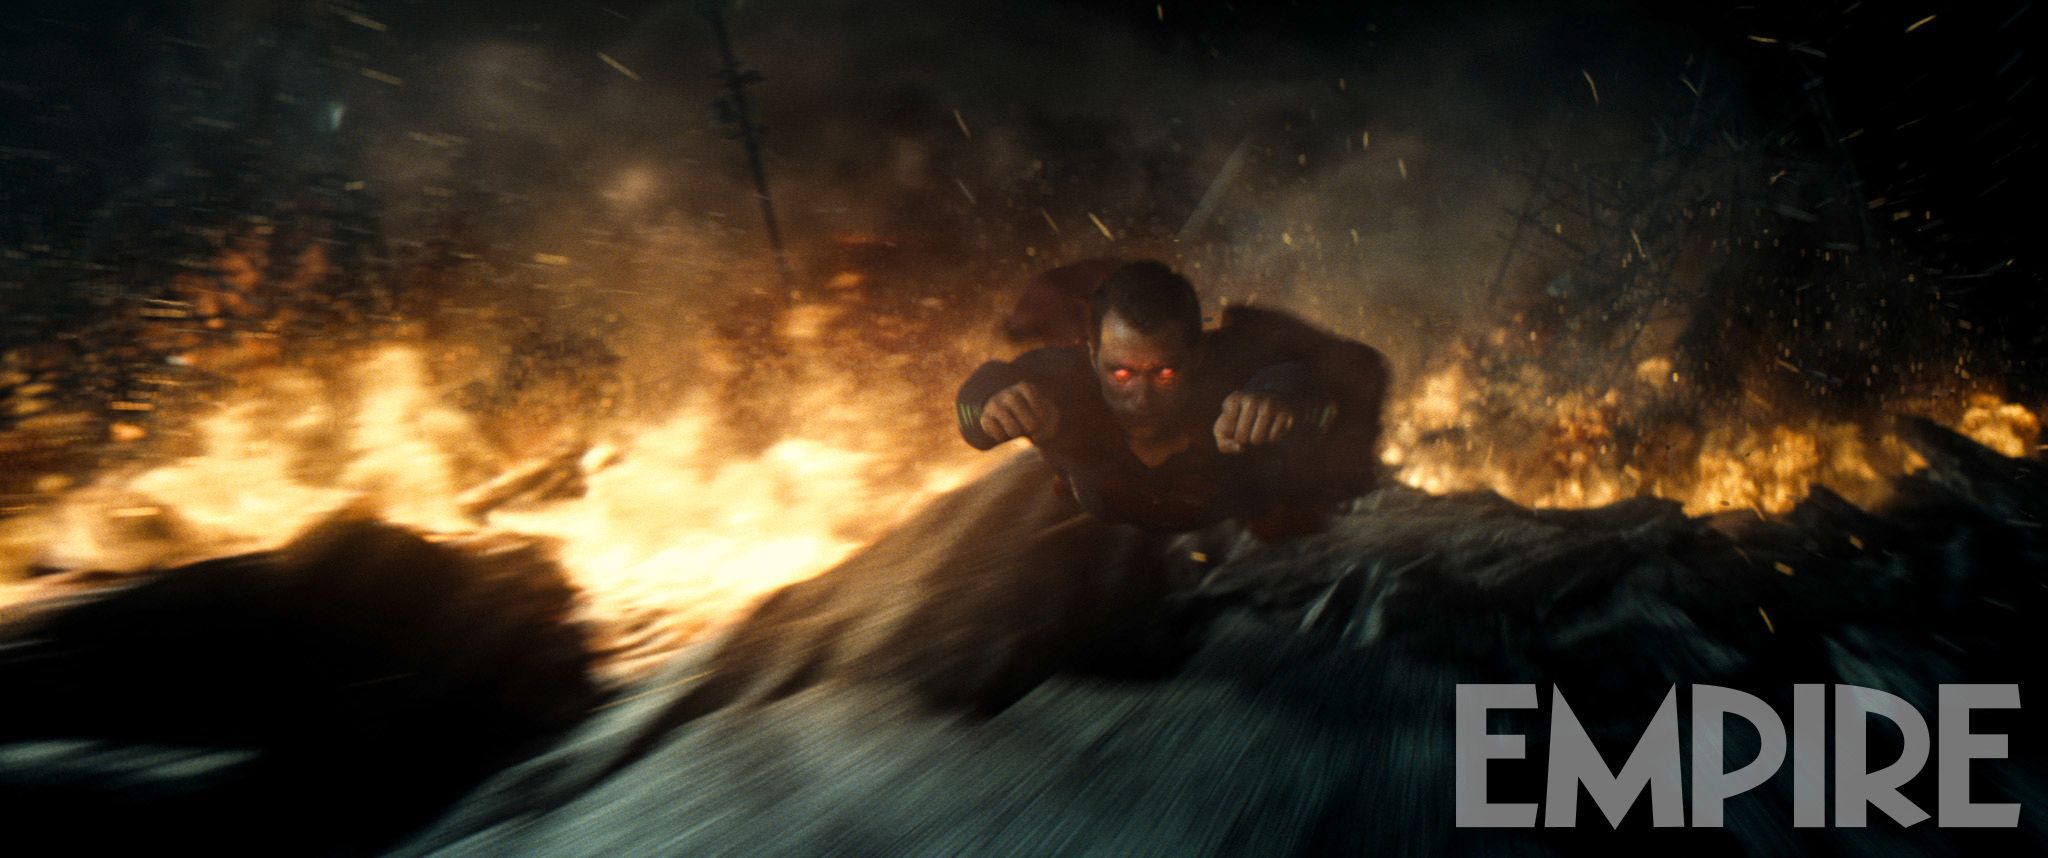 'Batman v Superman: Dawn of Justice' image from March 2016 issue of Empire Magazine